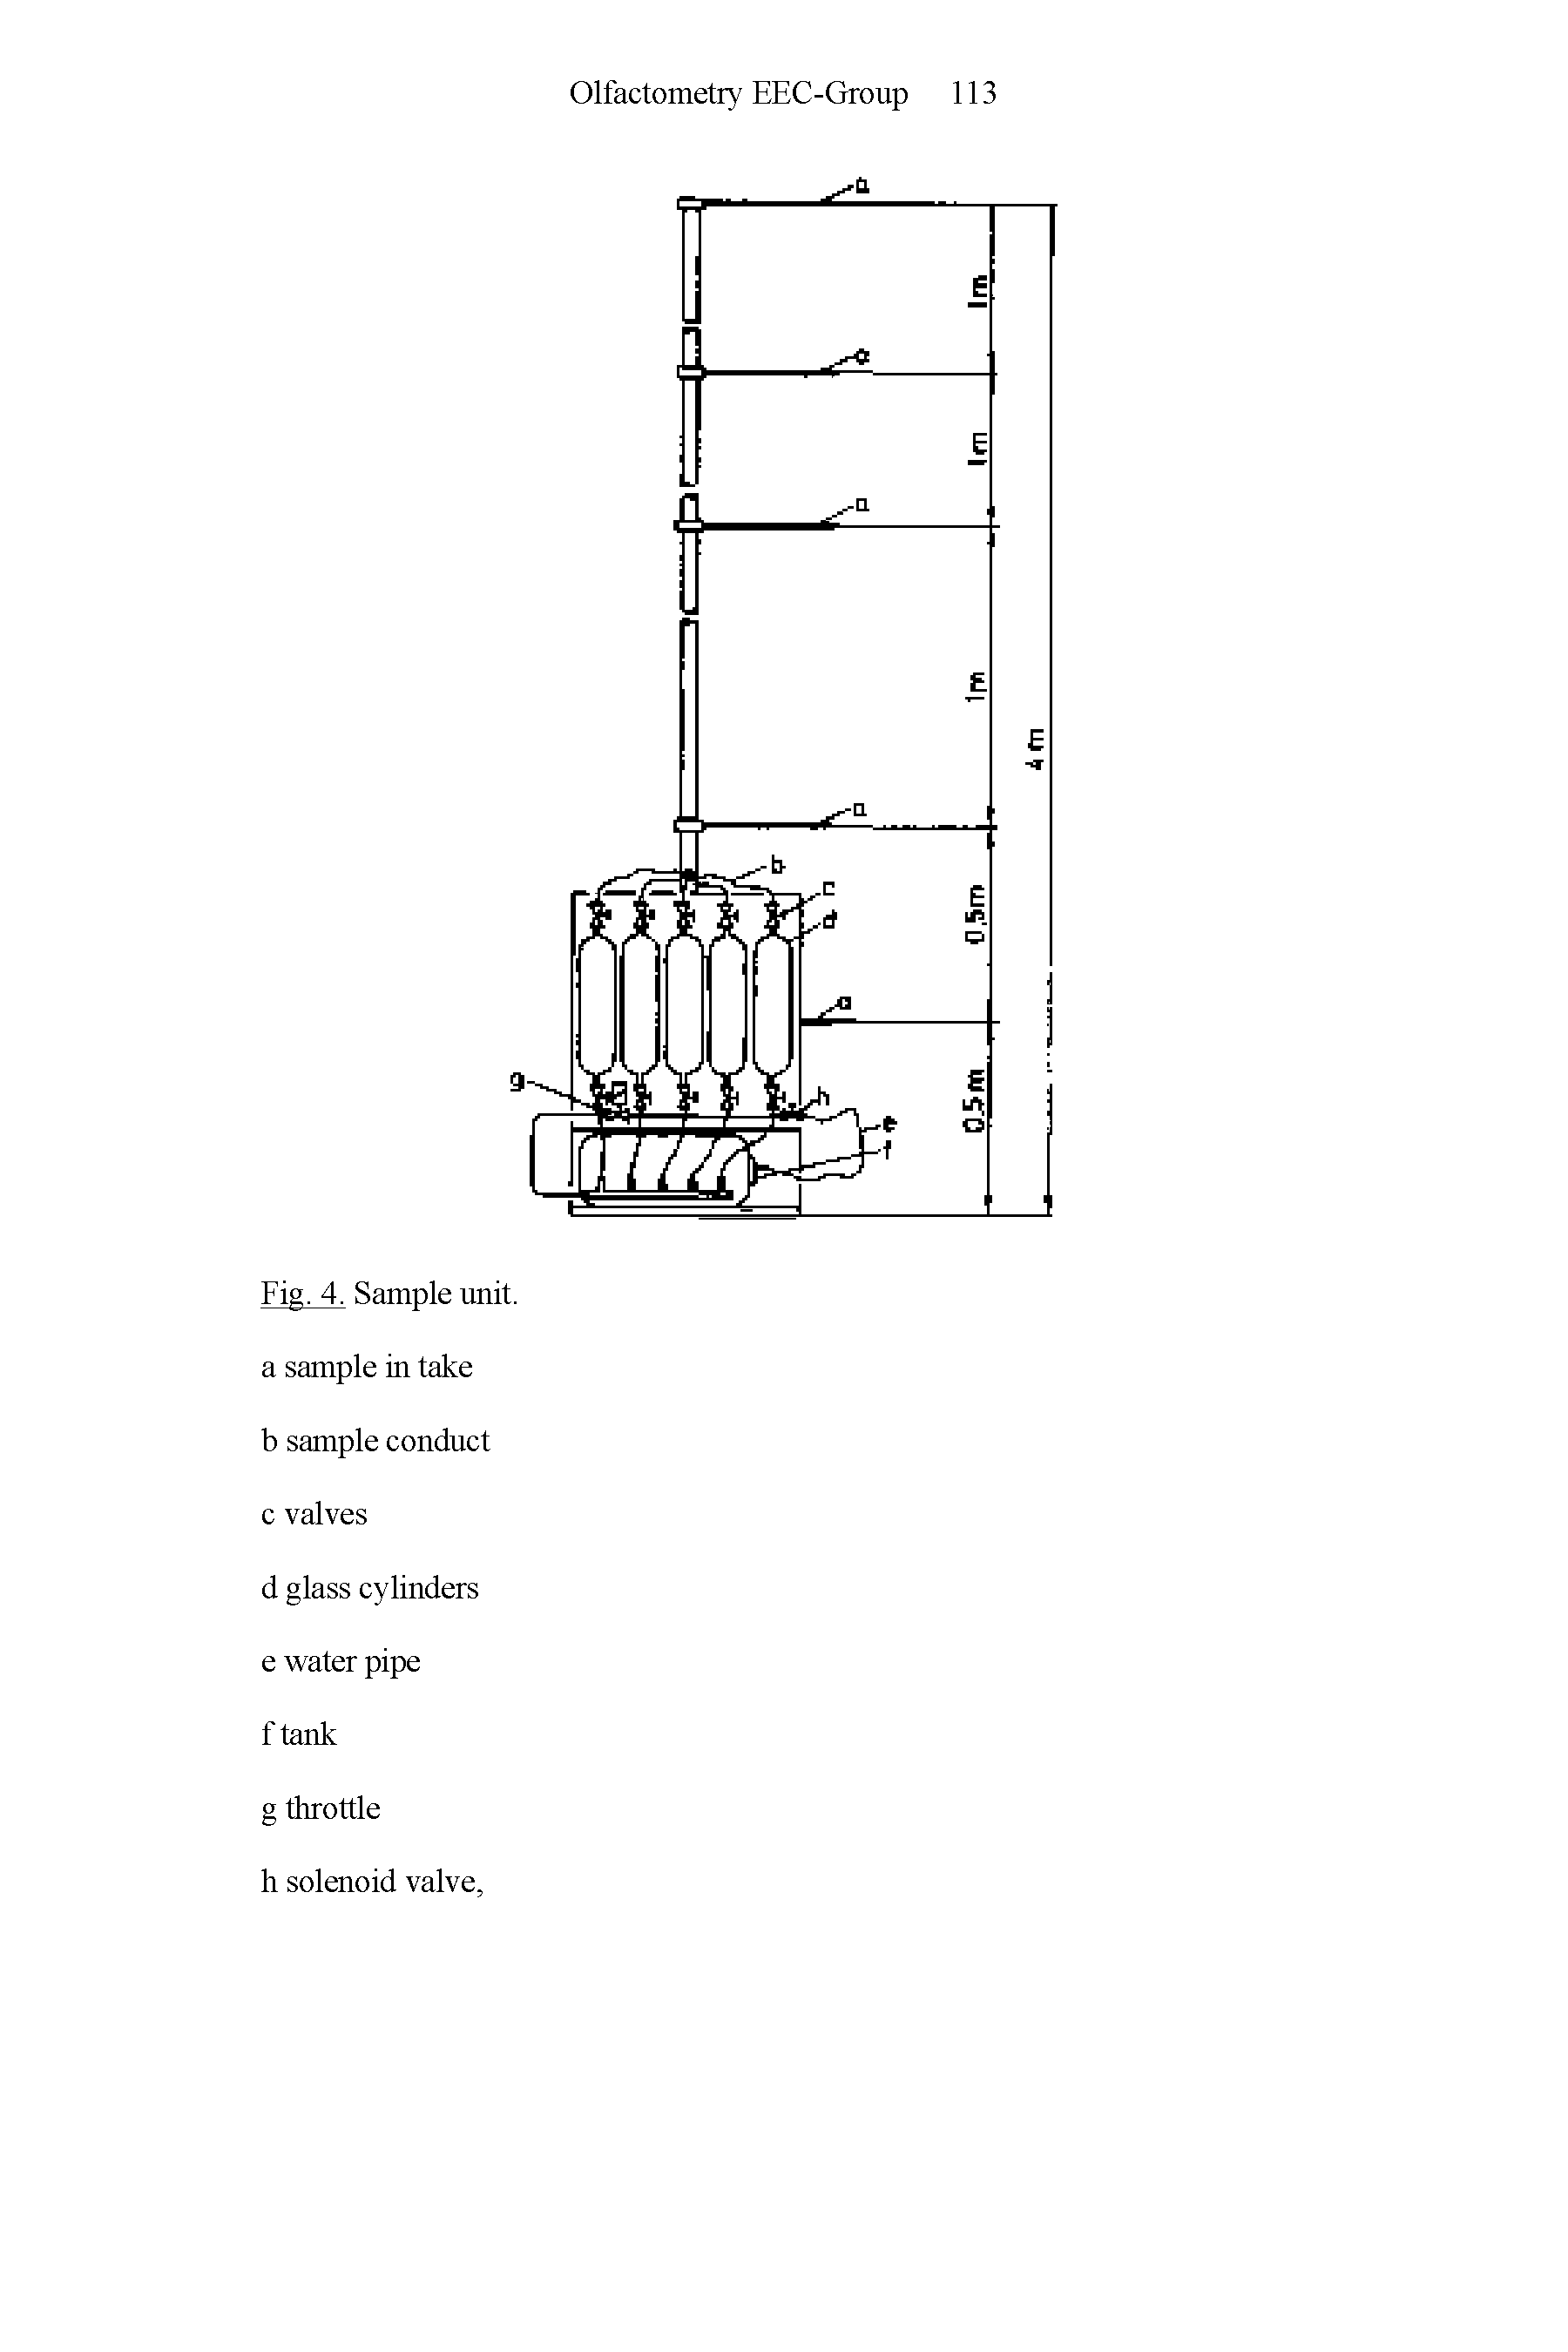 Fig. 4. Sample unit, a sample in take b sample conduct c valves...